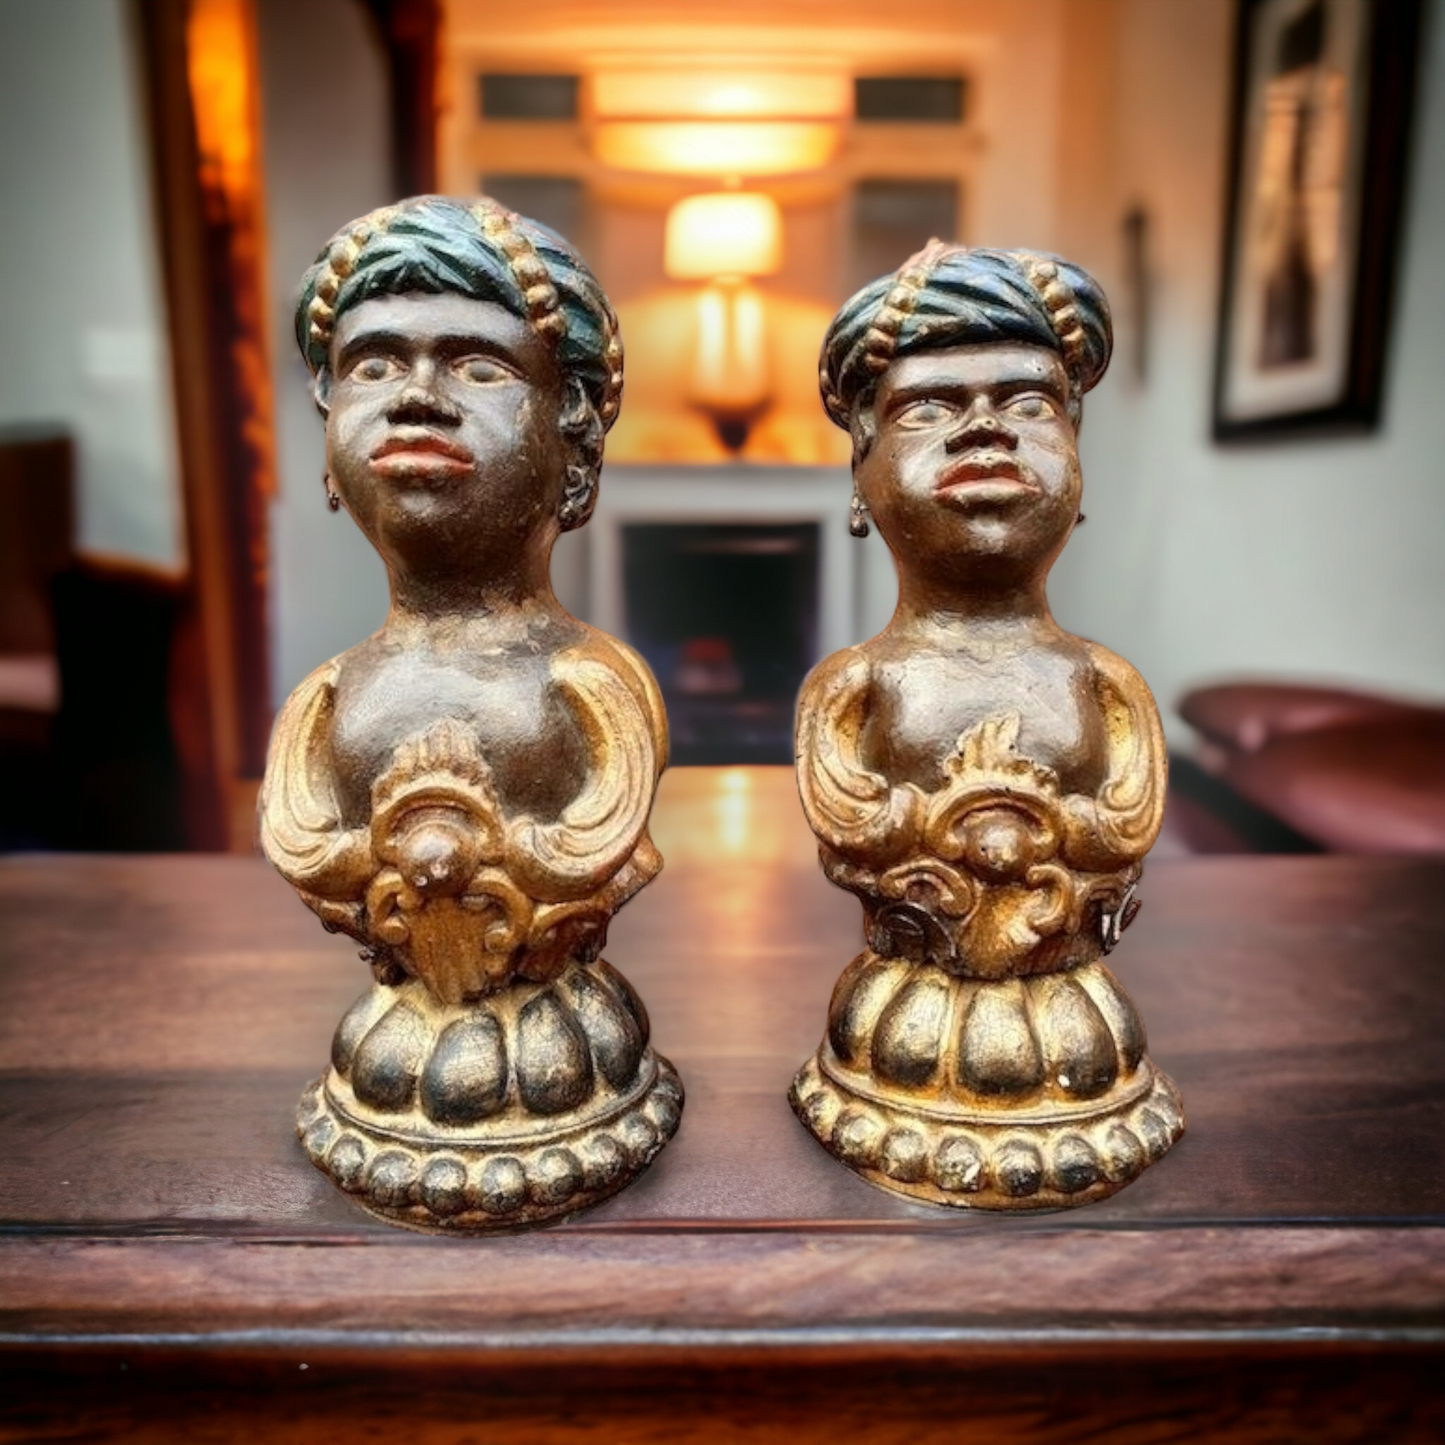 Rare Pair of Early 18th Century Venetian Rococo Period Polychromed Antique Carved Wood Newel Post Finials in the Form of Nubian Heads